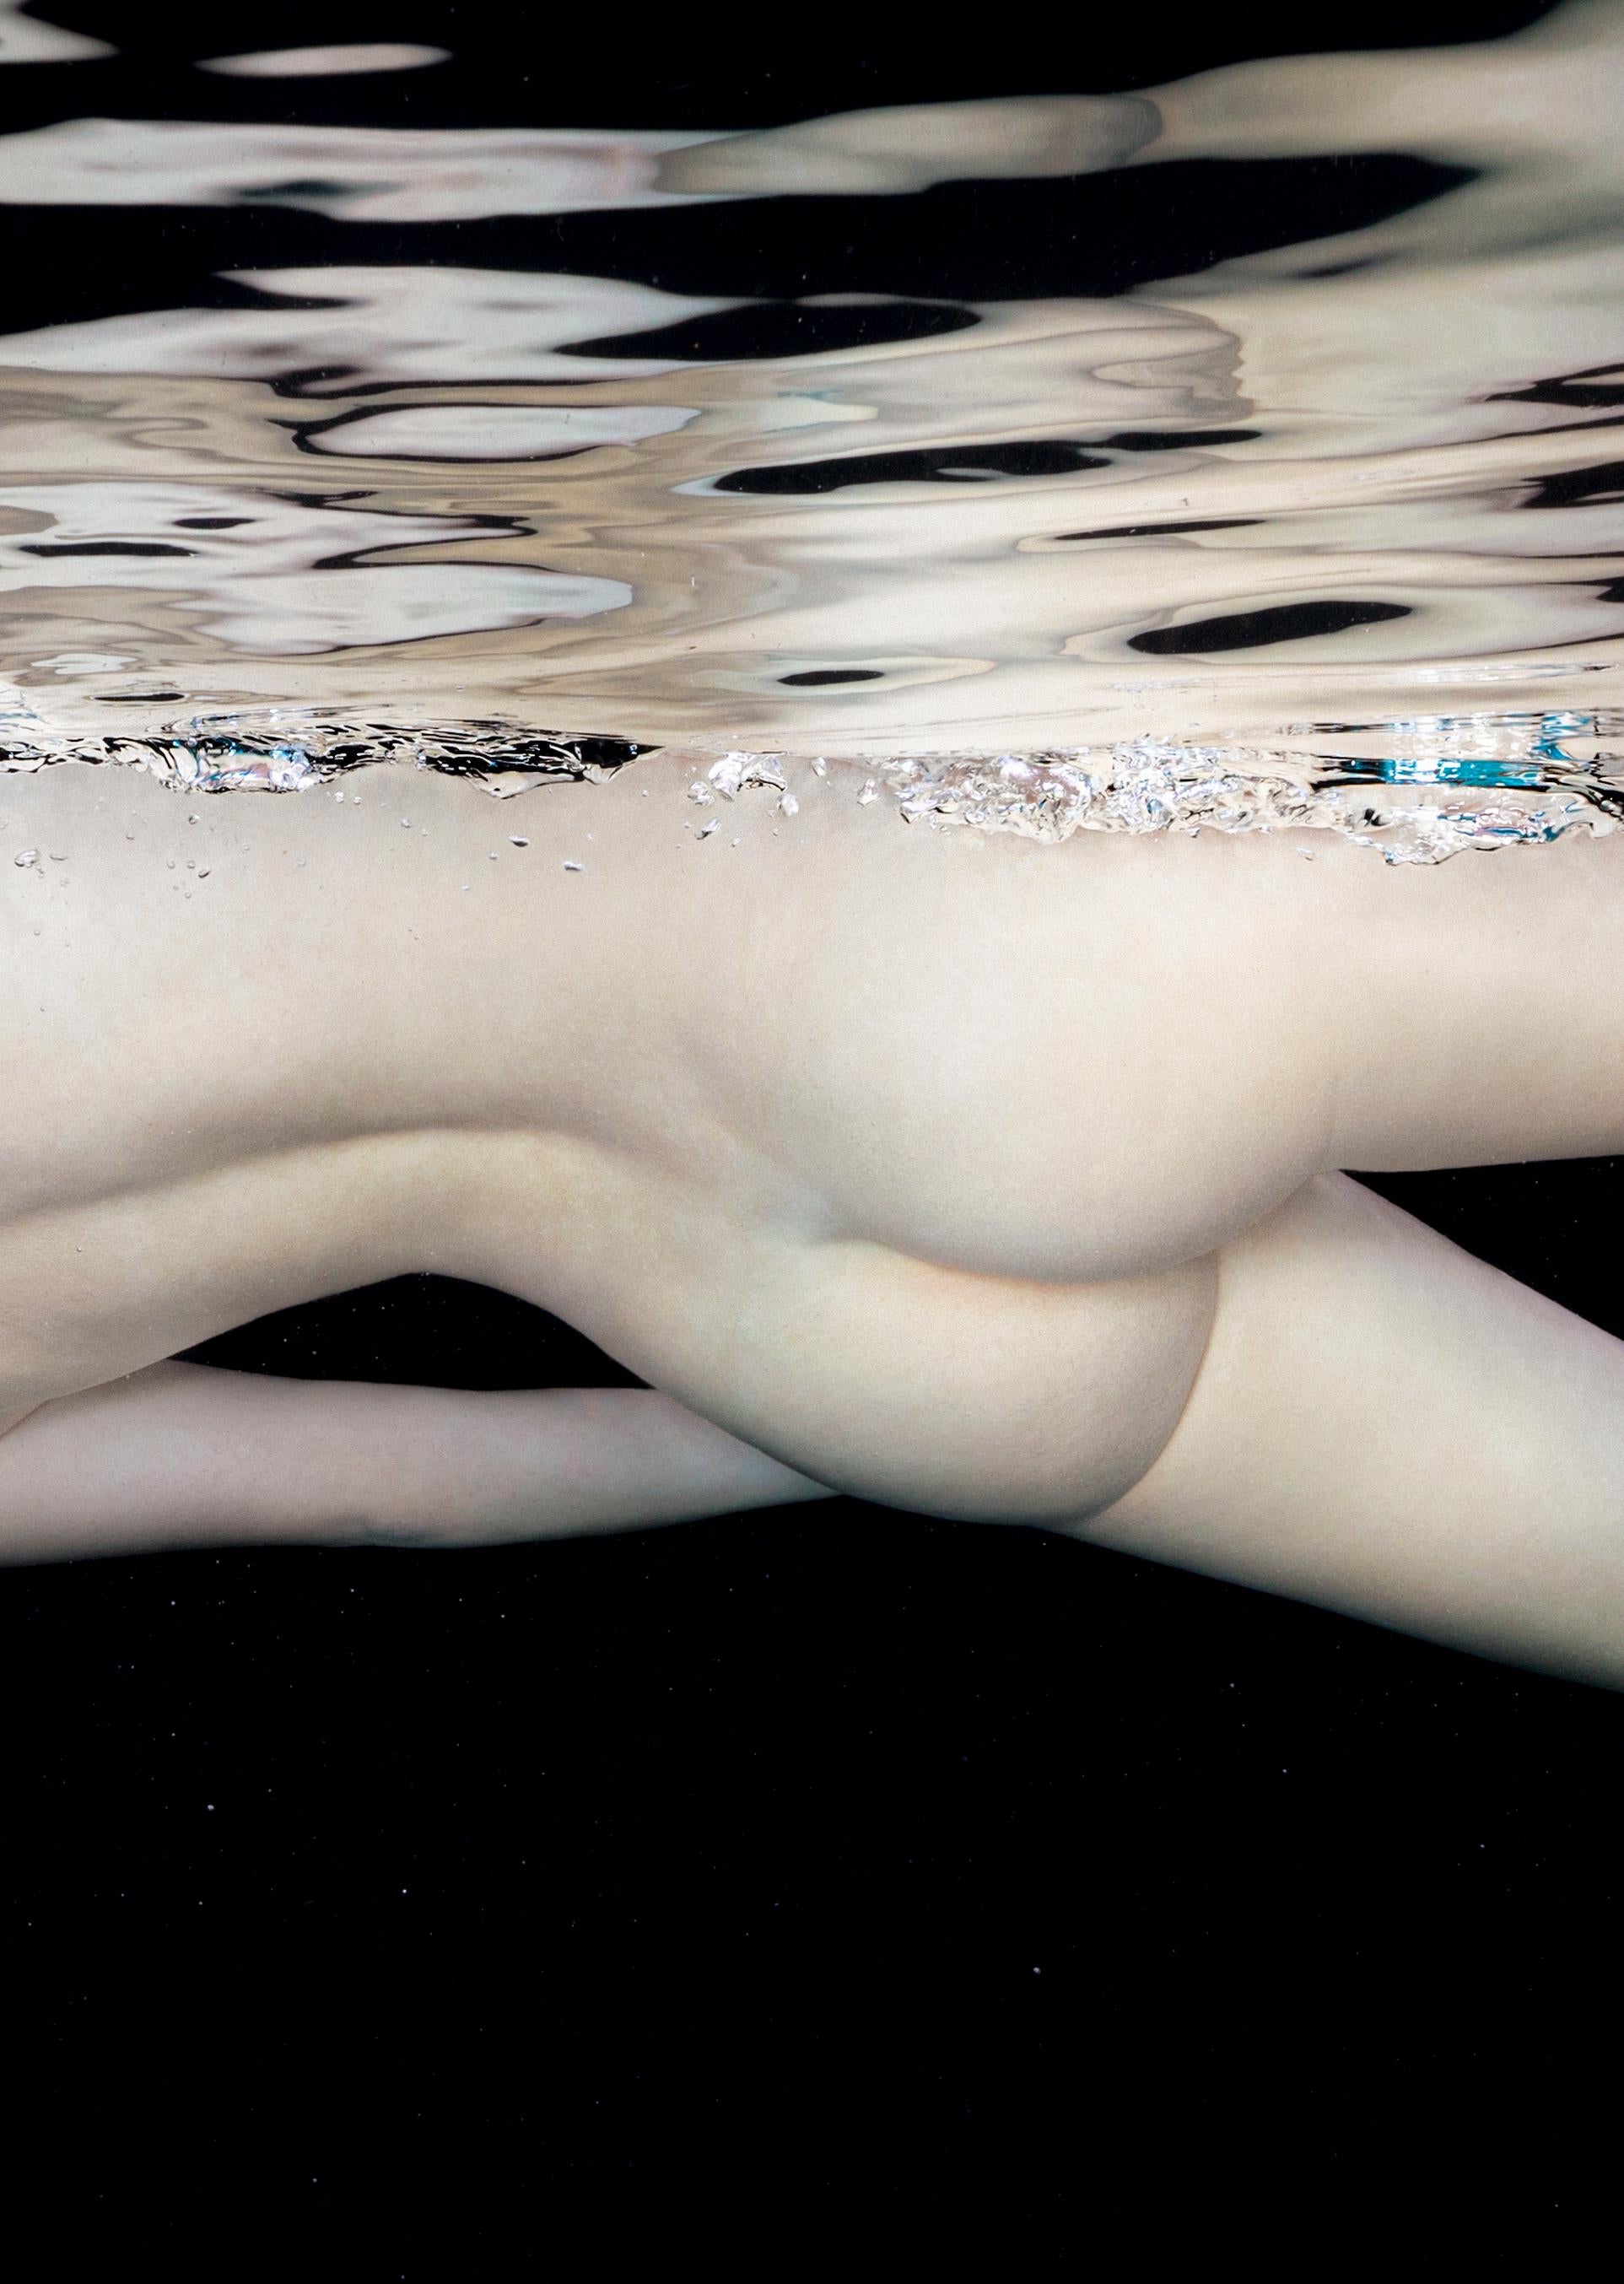 An underwater photograph of a naked young woman on neutral black background. 

Porcelain - aside from being an exquisite material - is the name of my project. The premise of the project: my best underwater photos in a porcelain color scheme on a